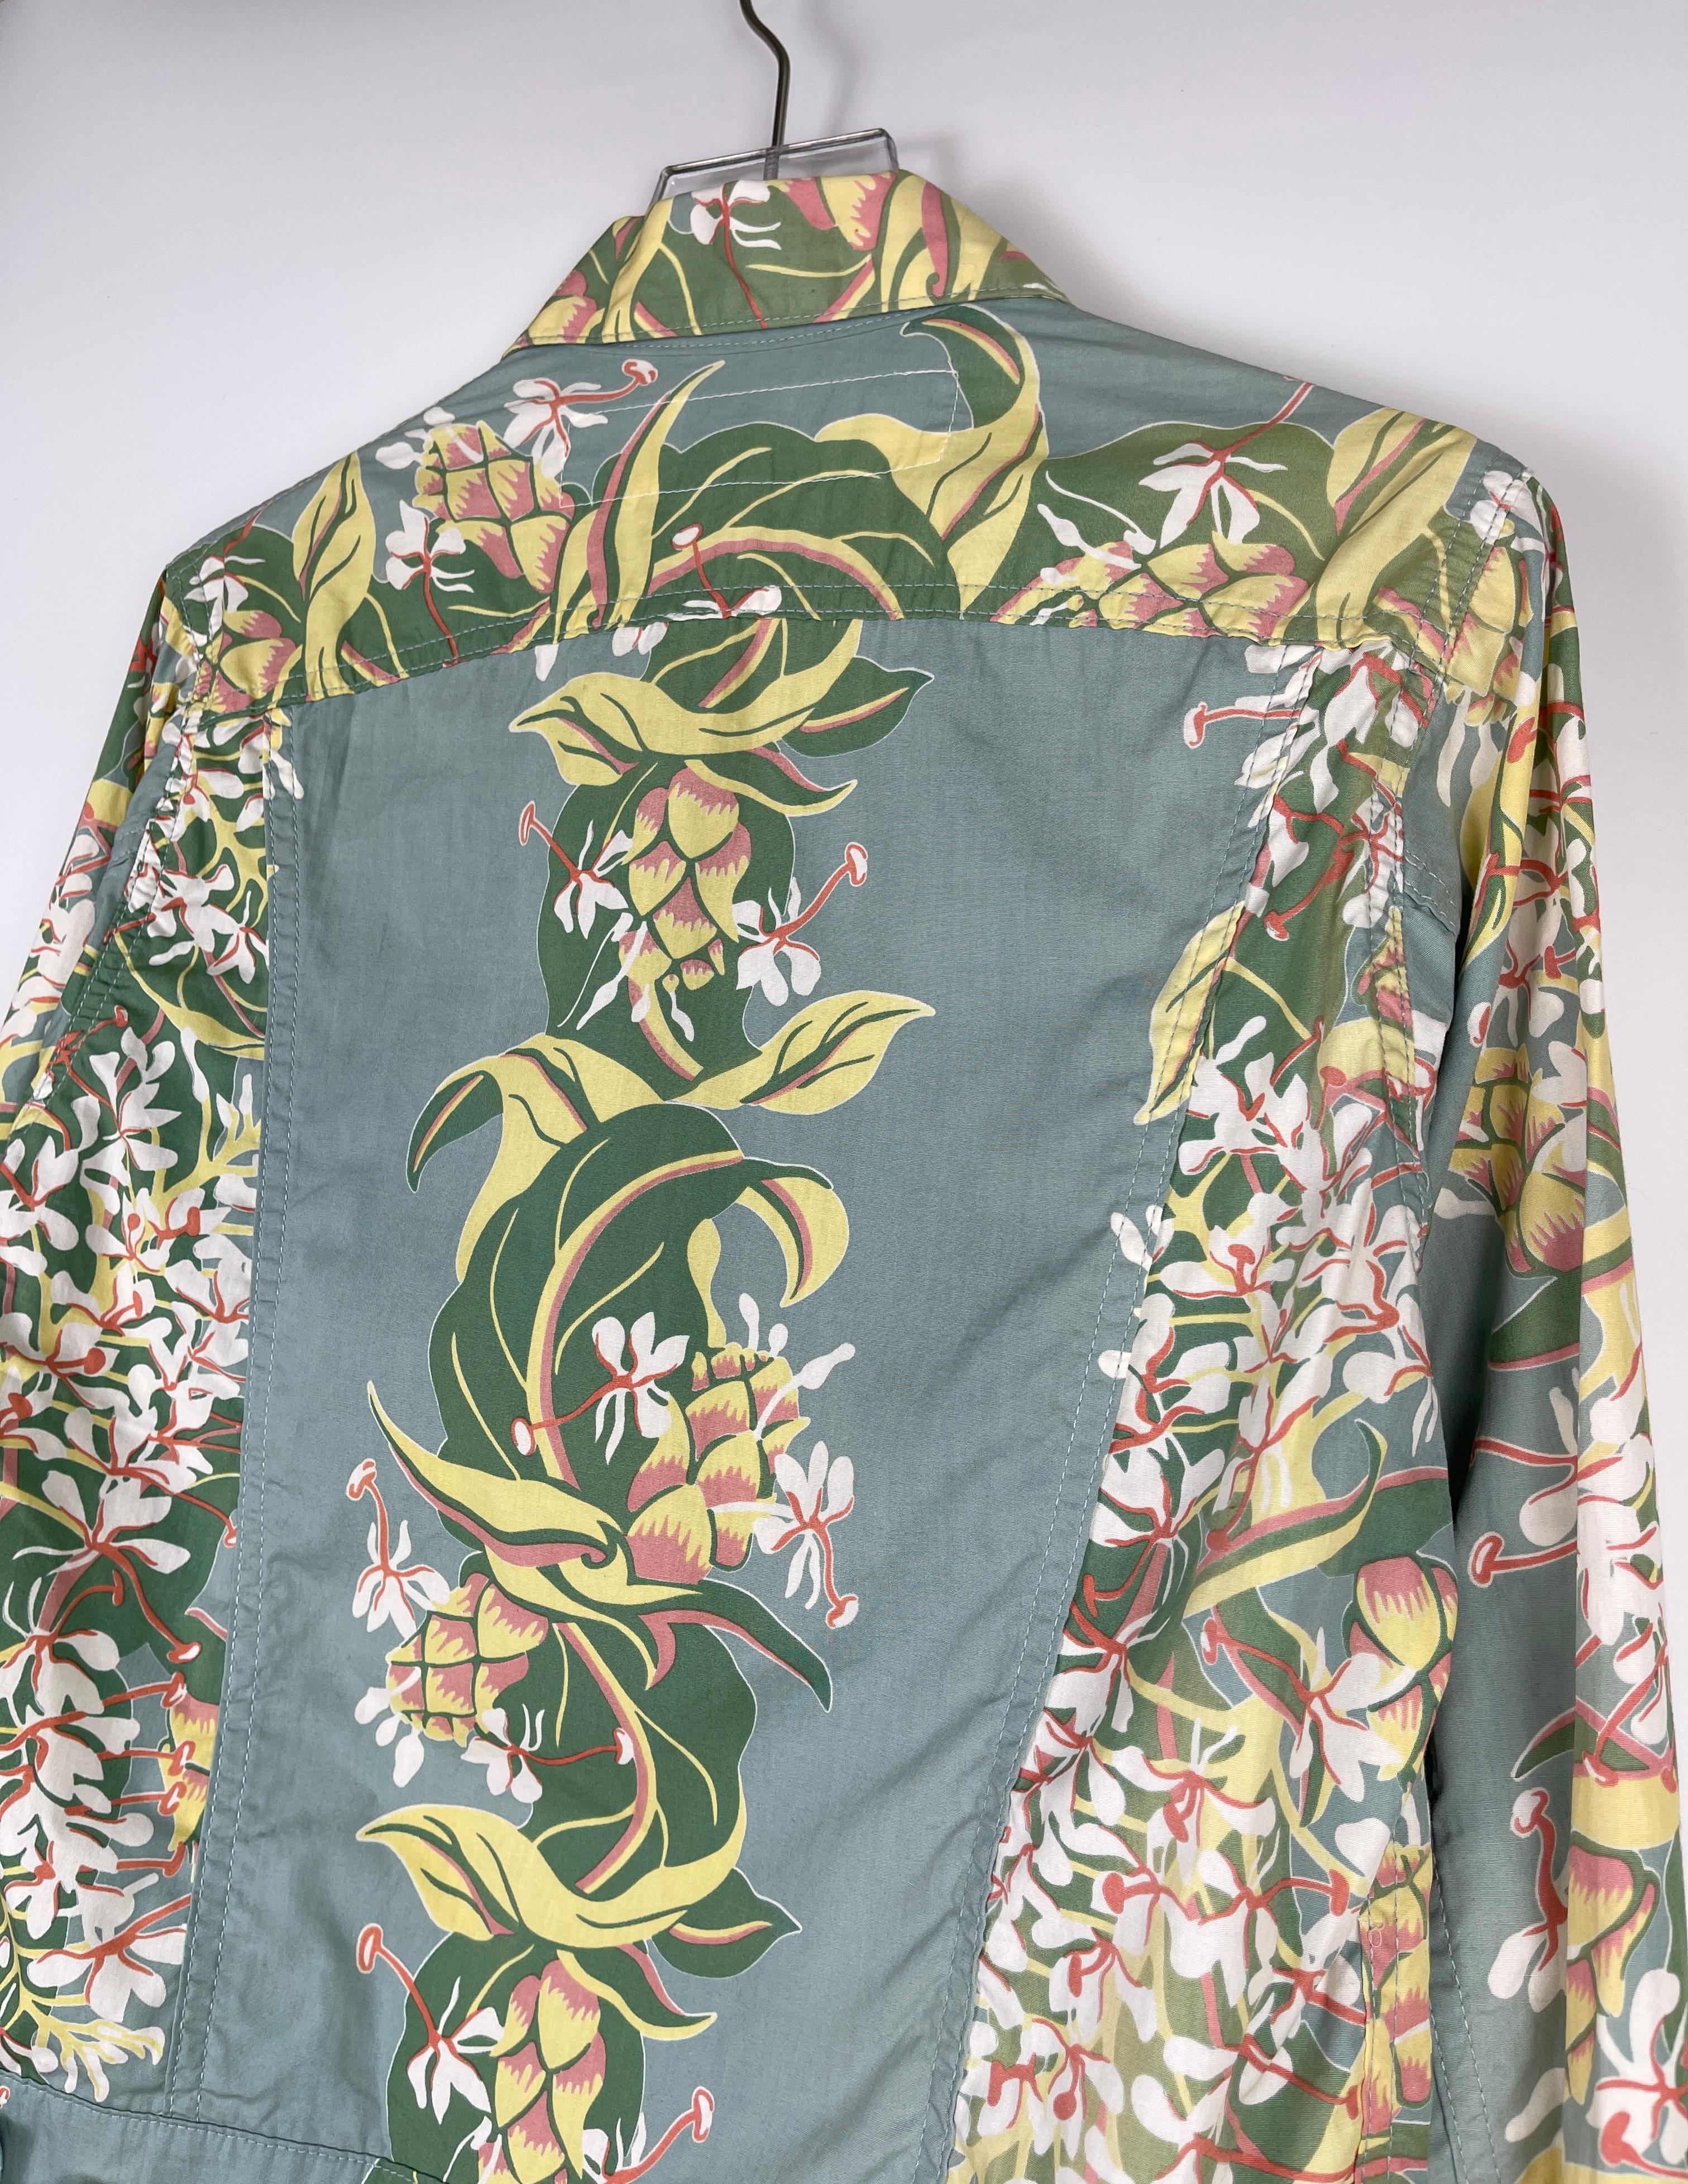 Junya Watanabe MAN S/S2003 Tropical Trucker Jacket In Excellent Condition For Sale In Seattle, WA